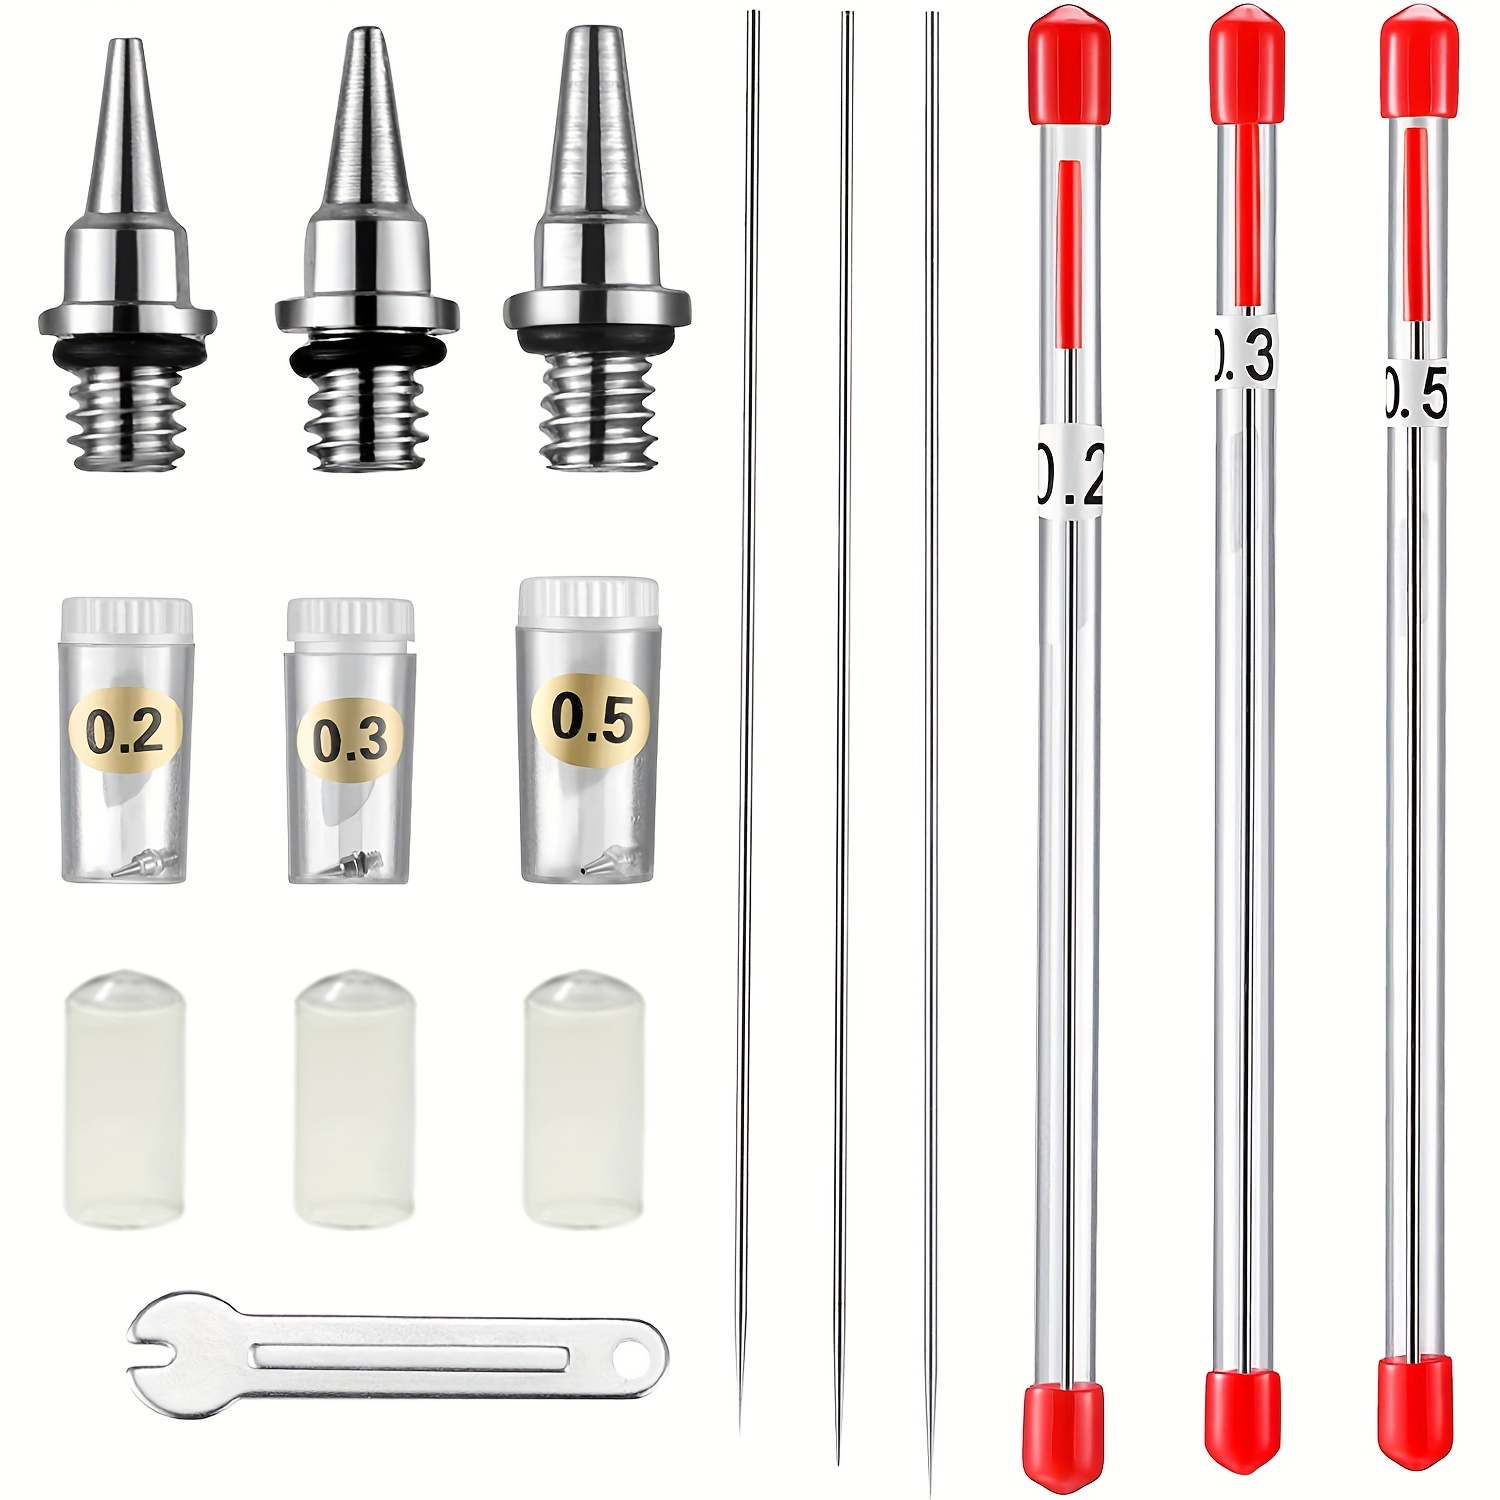 

10-piece Airbrush Replacement Kit With 0.2/0.3/0.5mm Nozzles, Needles & Protective Caps - Durable Metal Spray Gun Accessories